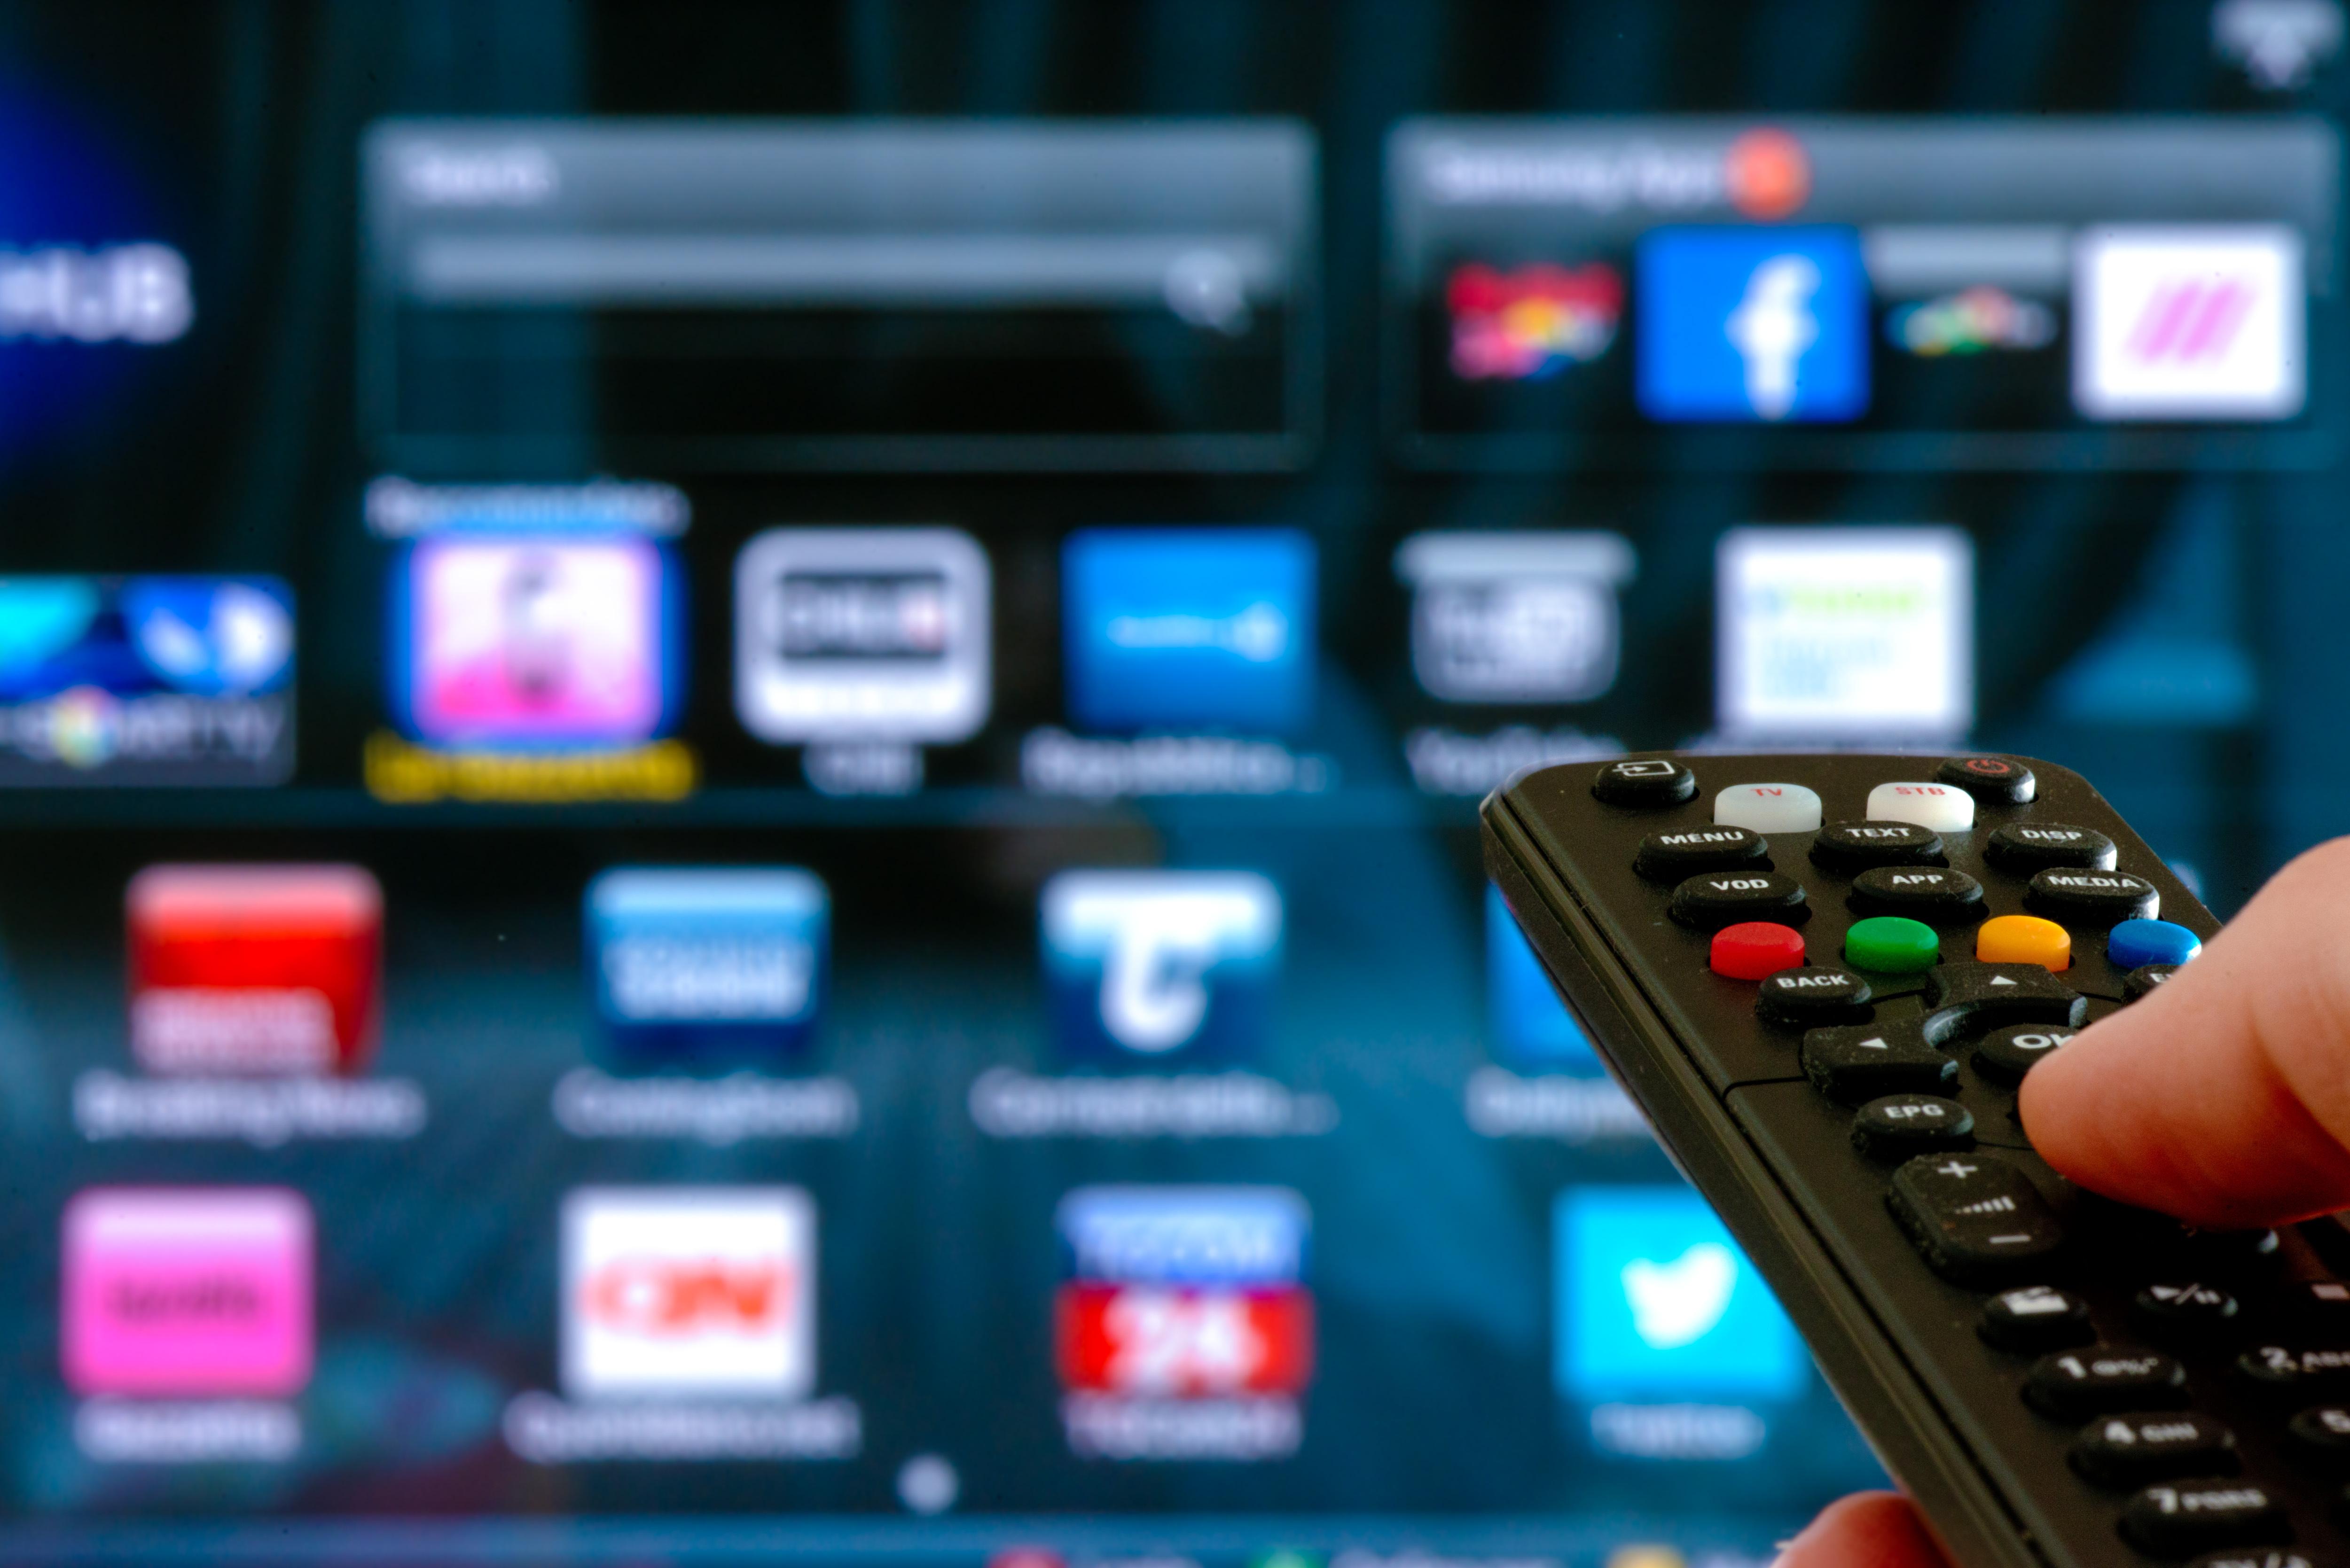 How to set up your smart TV